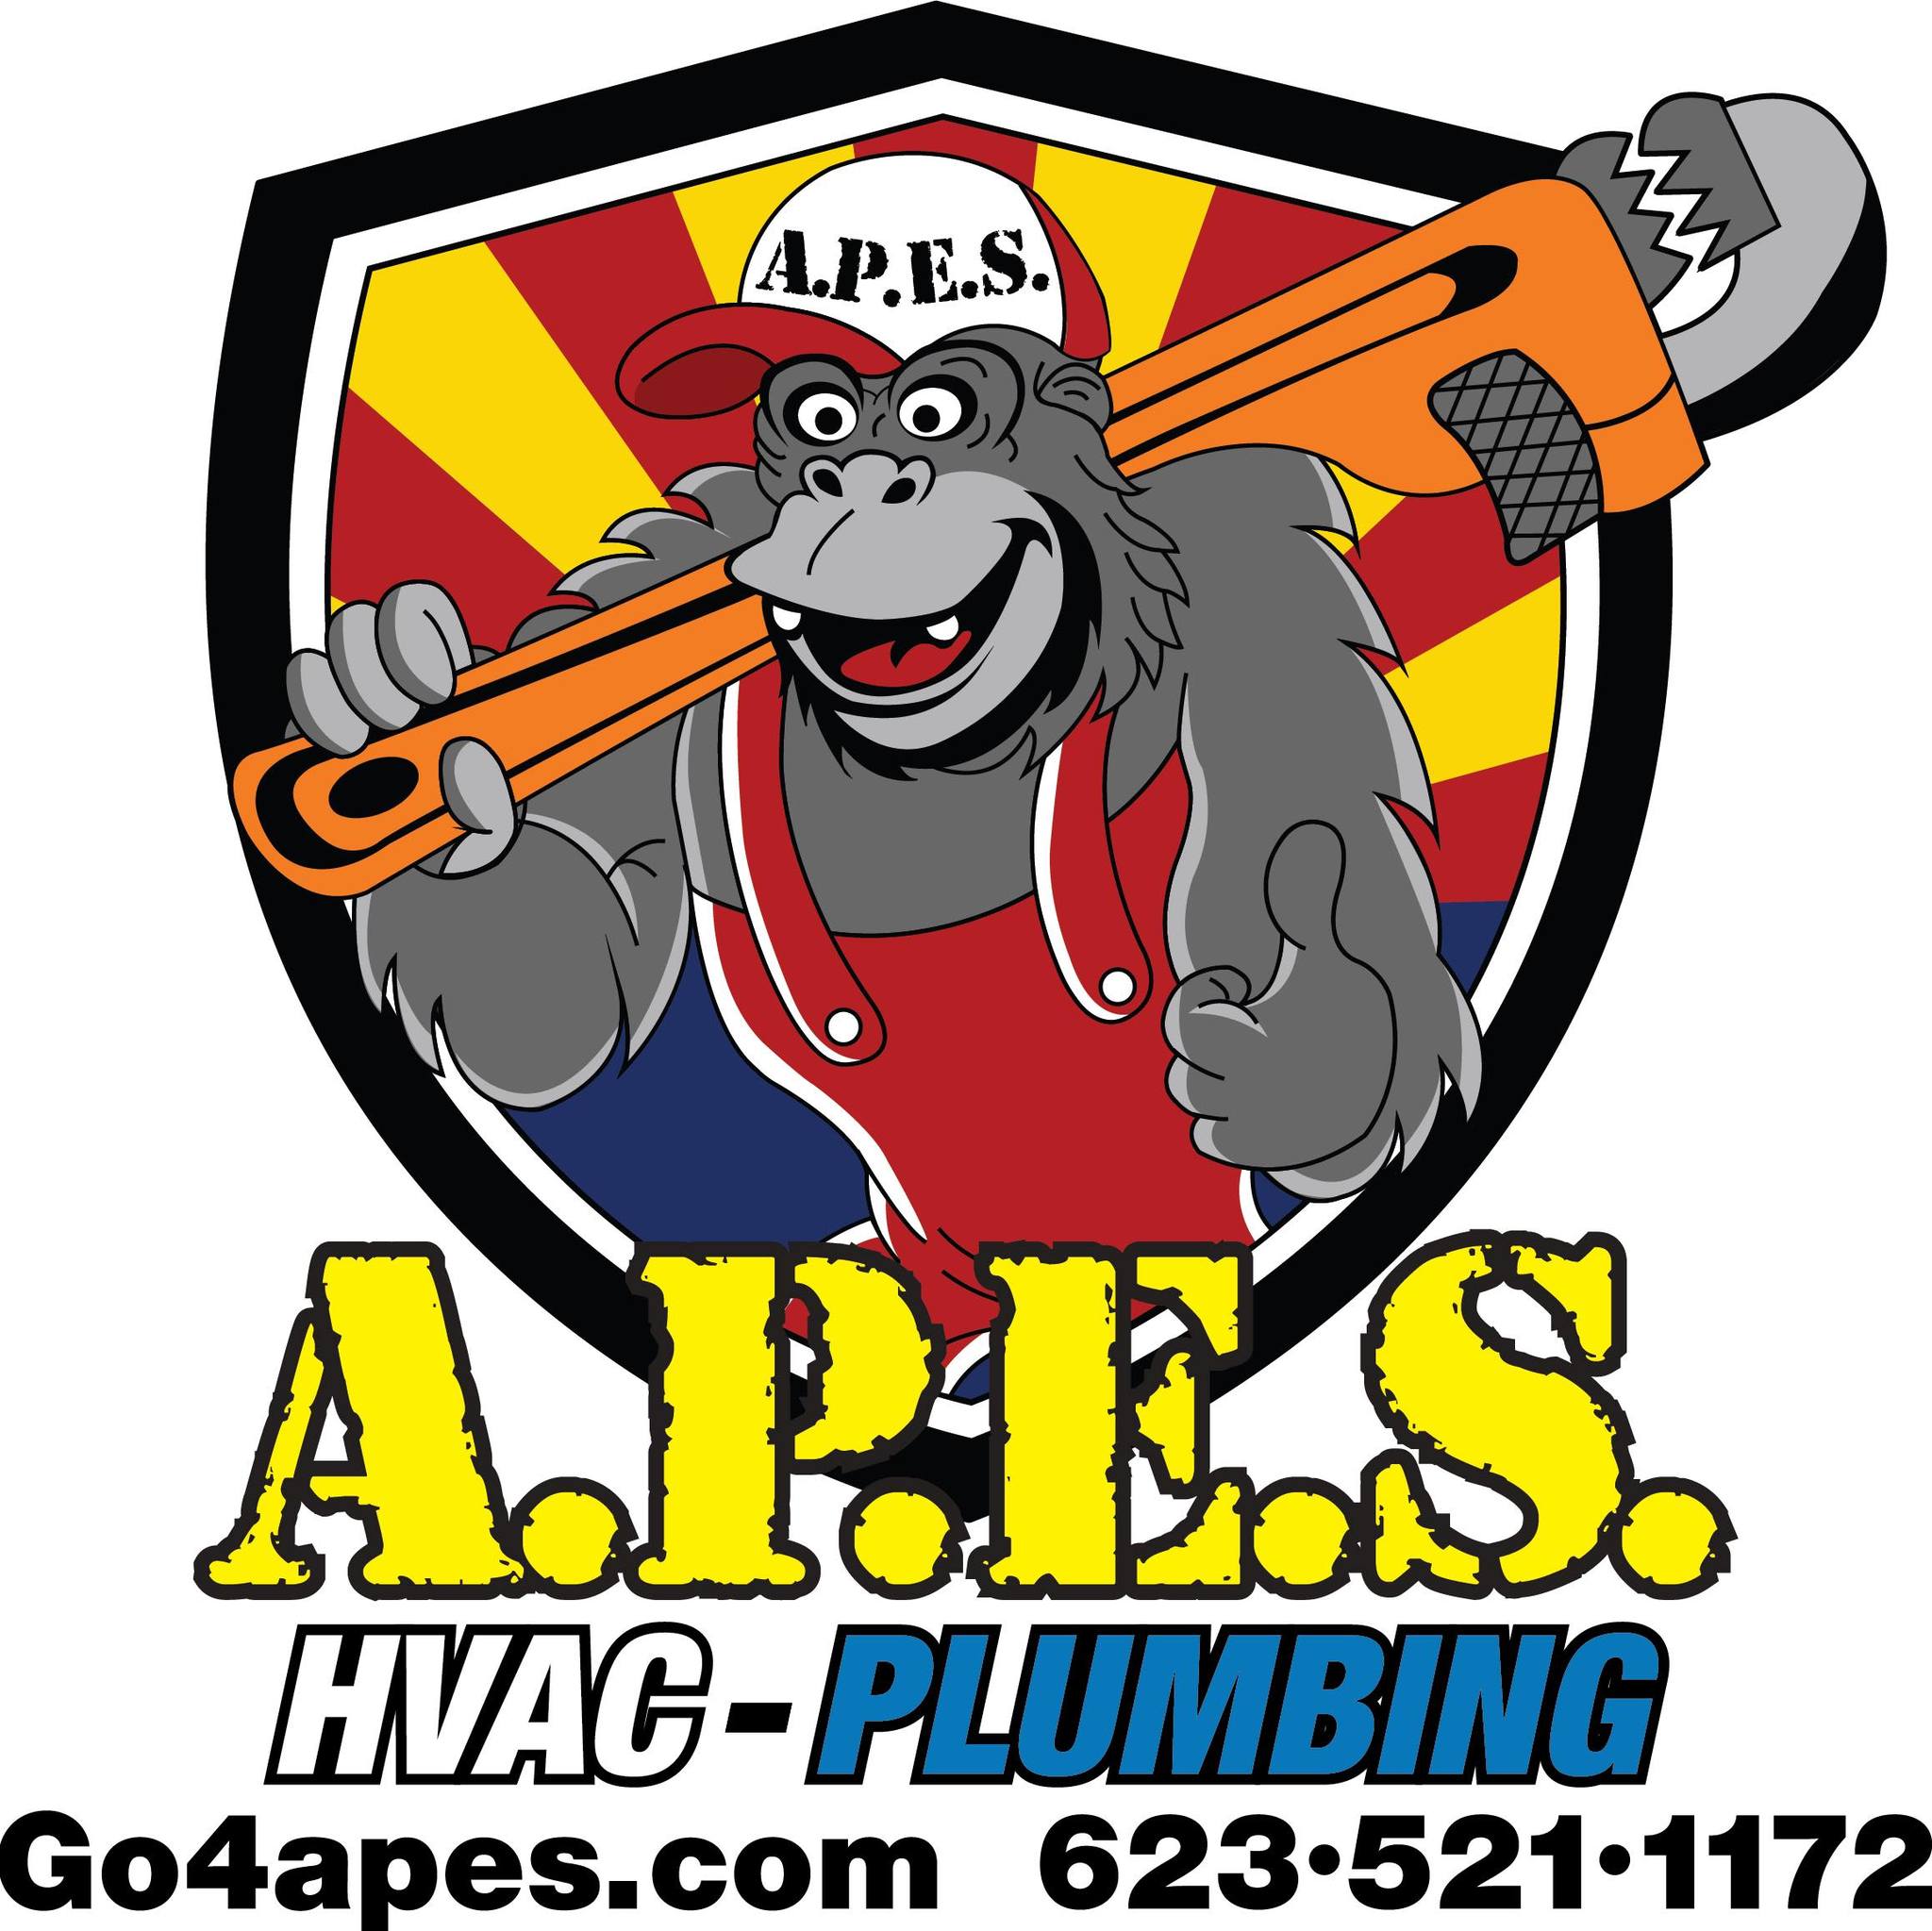 Check out A.P.E.S. Plumbing, Hvac, and Appliance